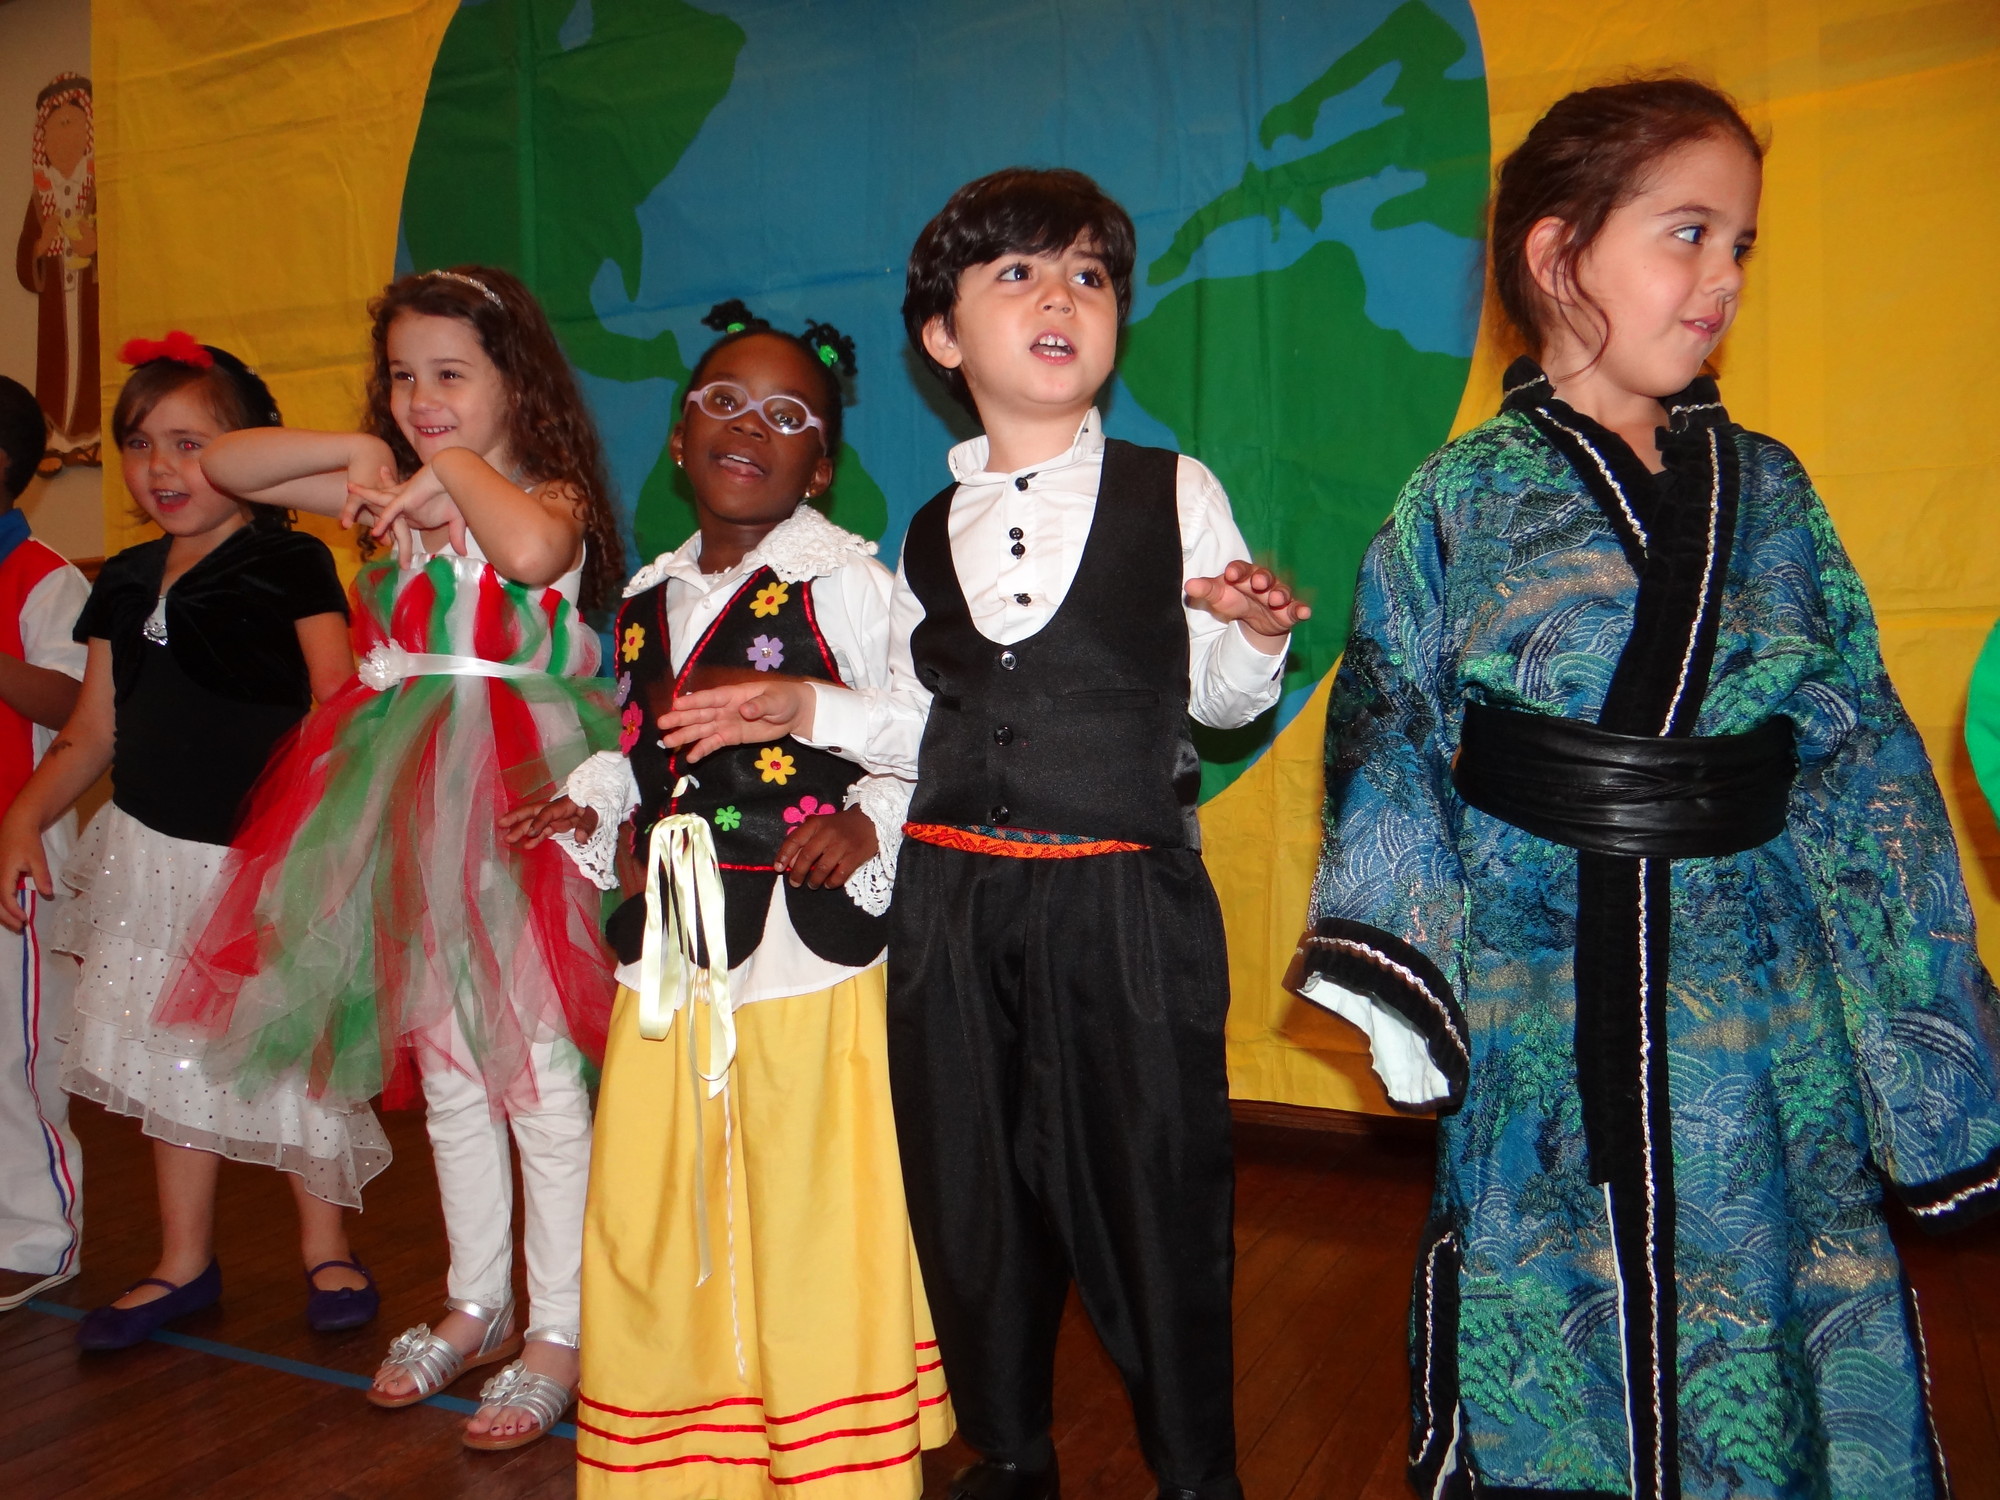 Students dressed up and sang songs for family members in attendance during the Community Nursery School of Baldwin’s international show on May 22.